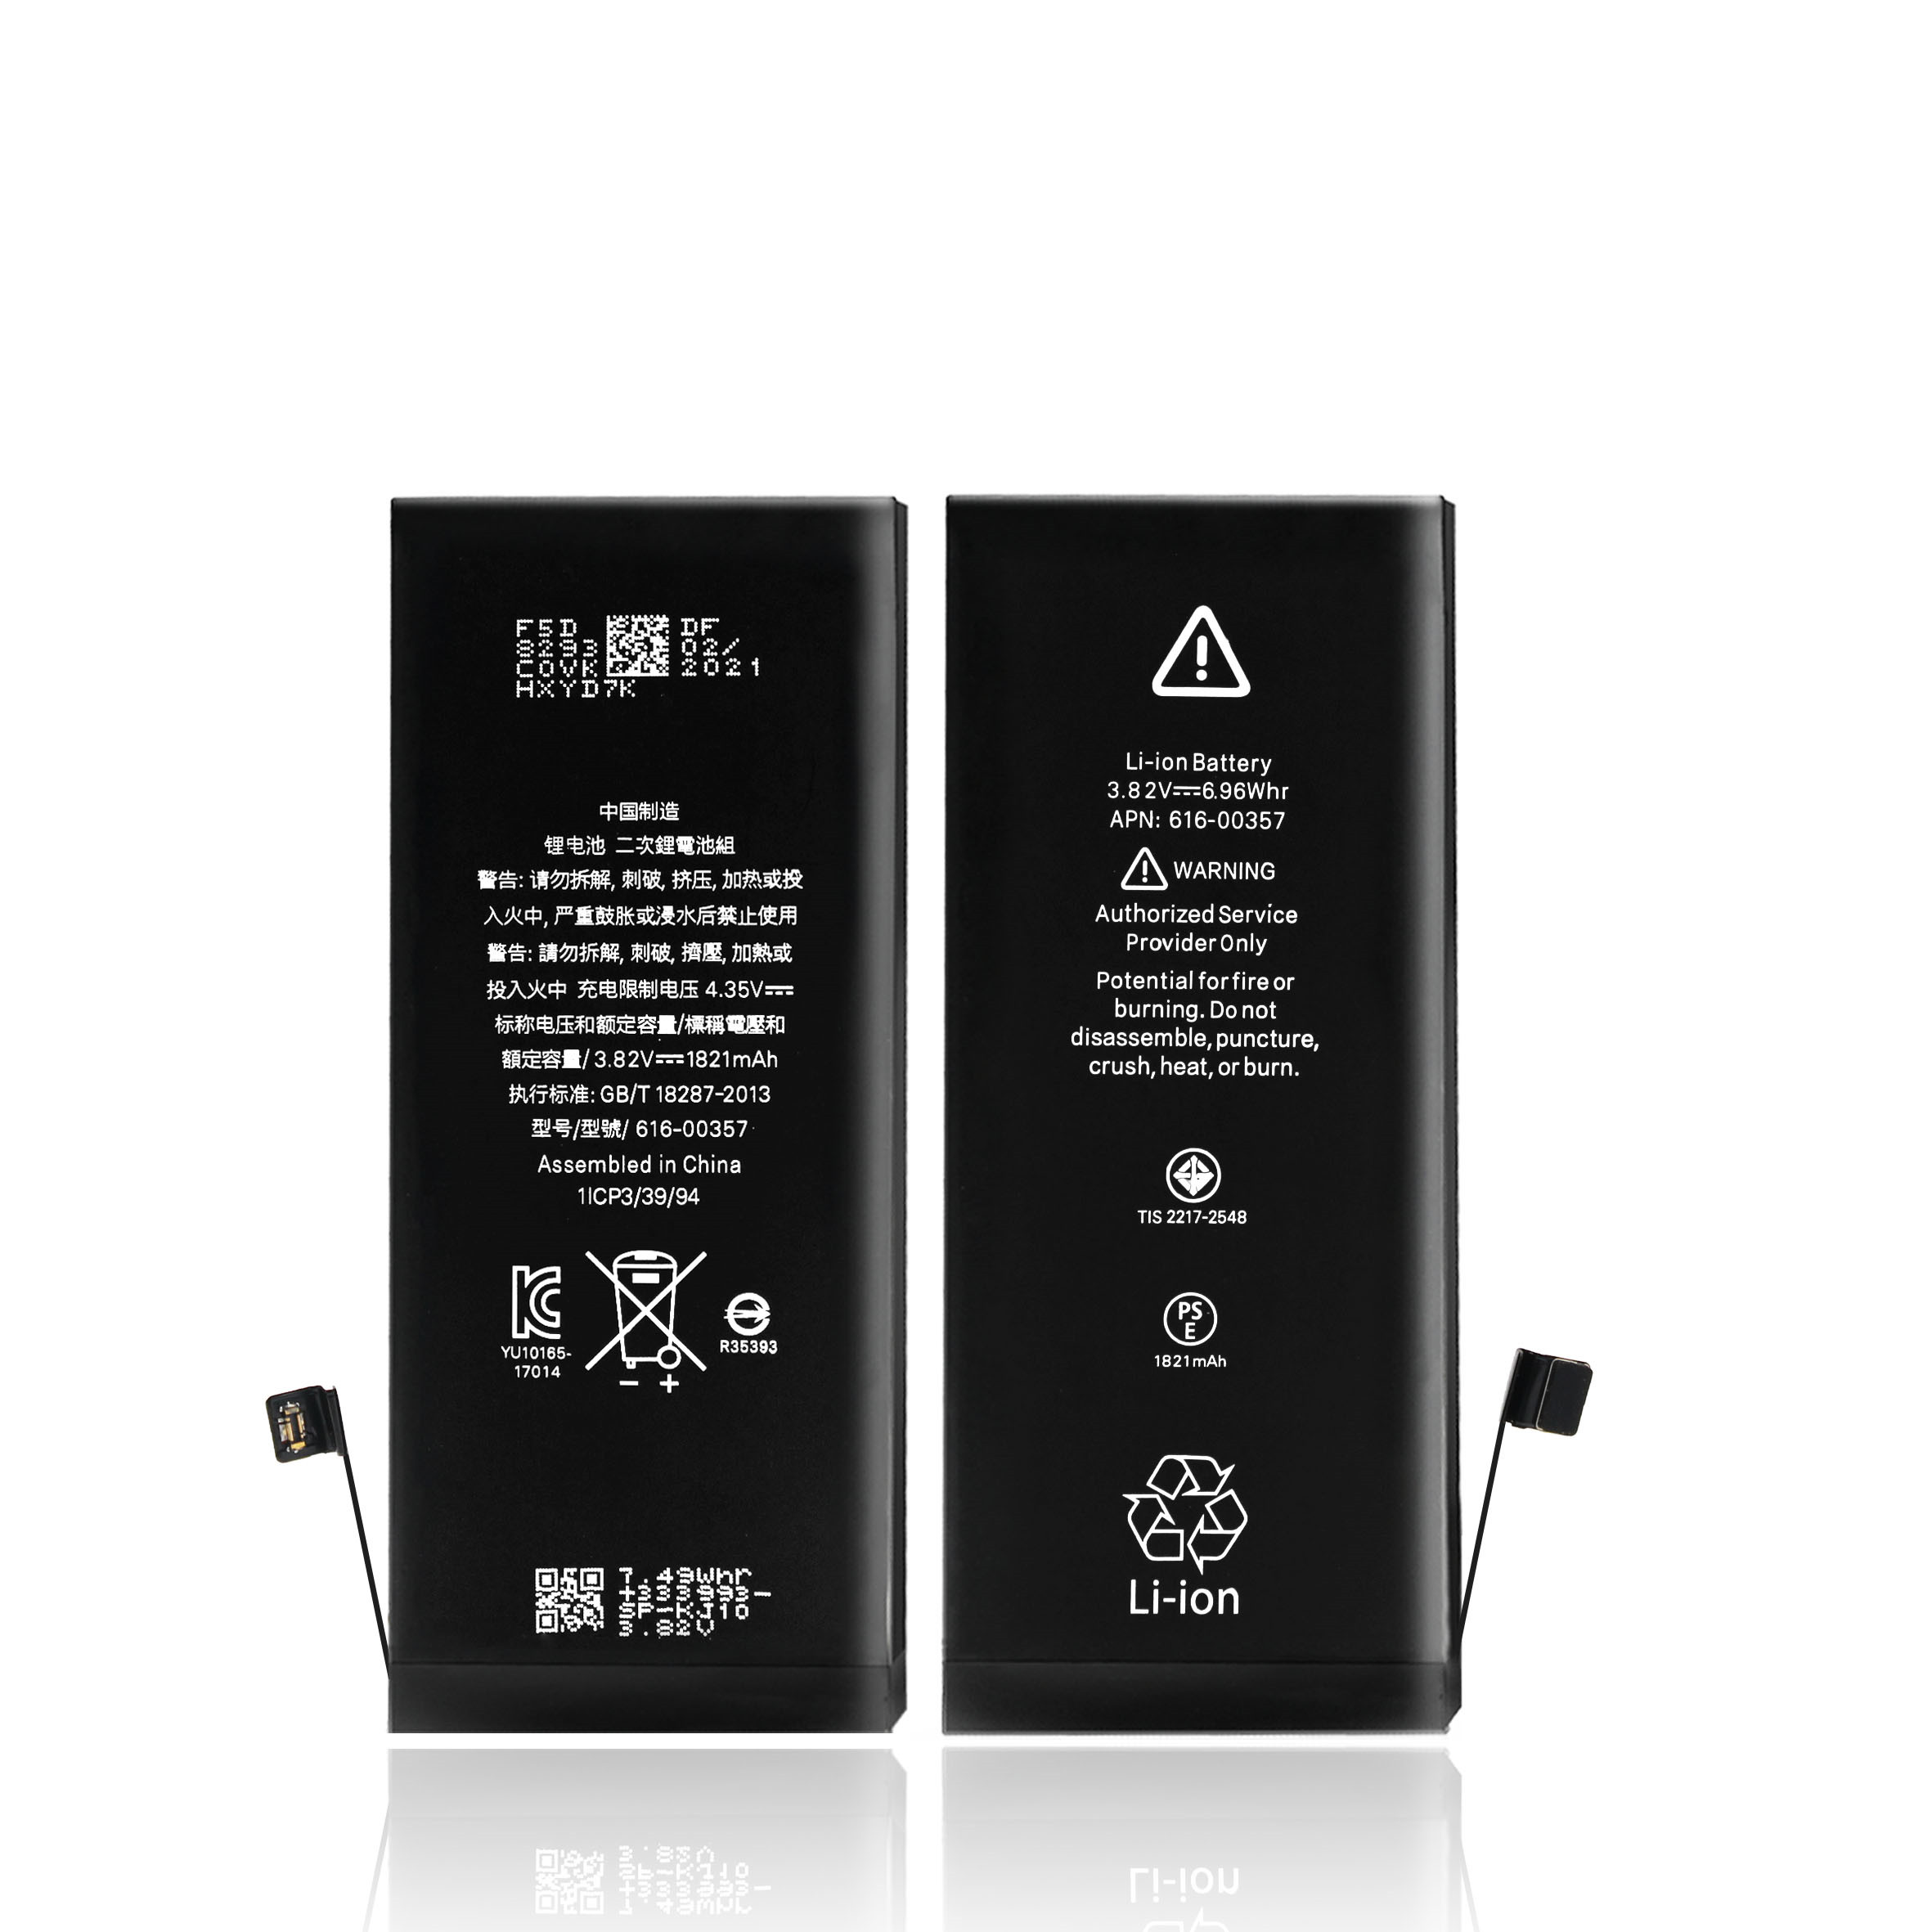 Iphone 8G battery